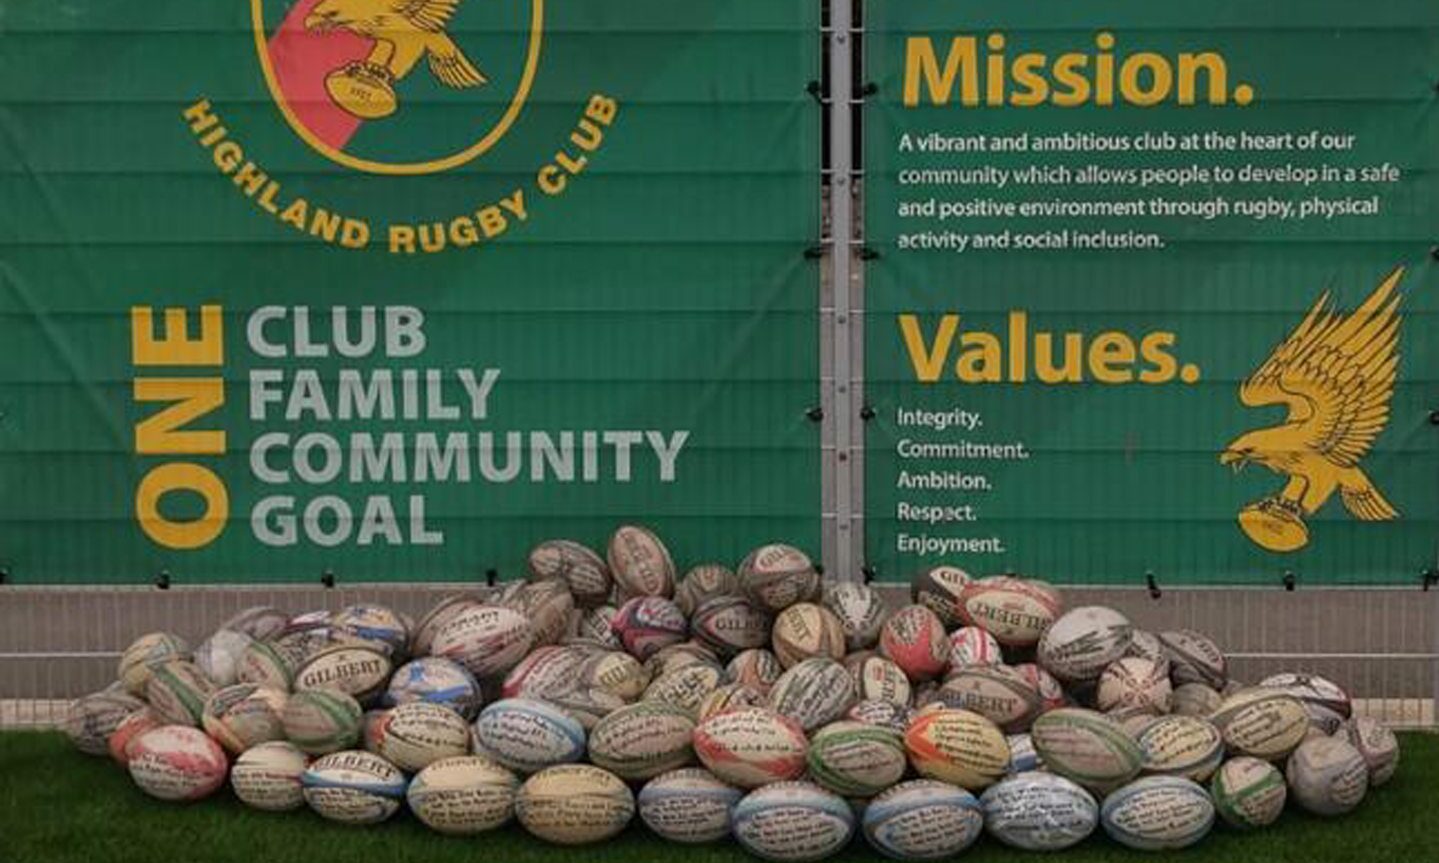 More than 100 rugby balls will be left throughout the area served by Highland Rugby Club in order to encourage play as part of the club's centenary celebrations.